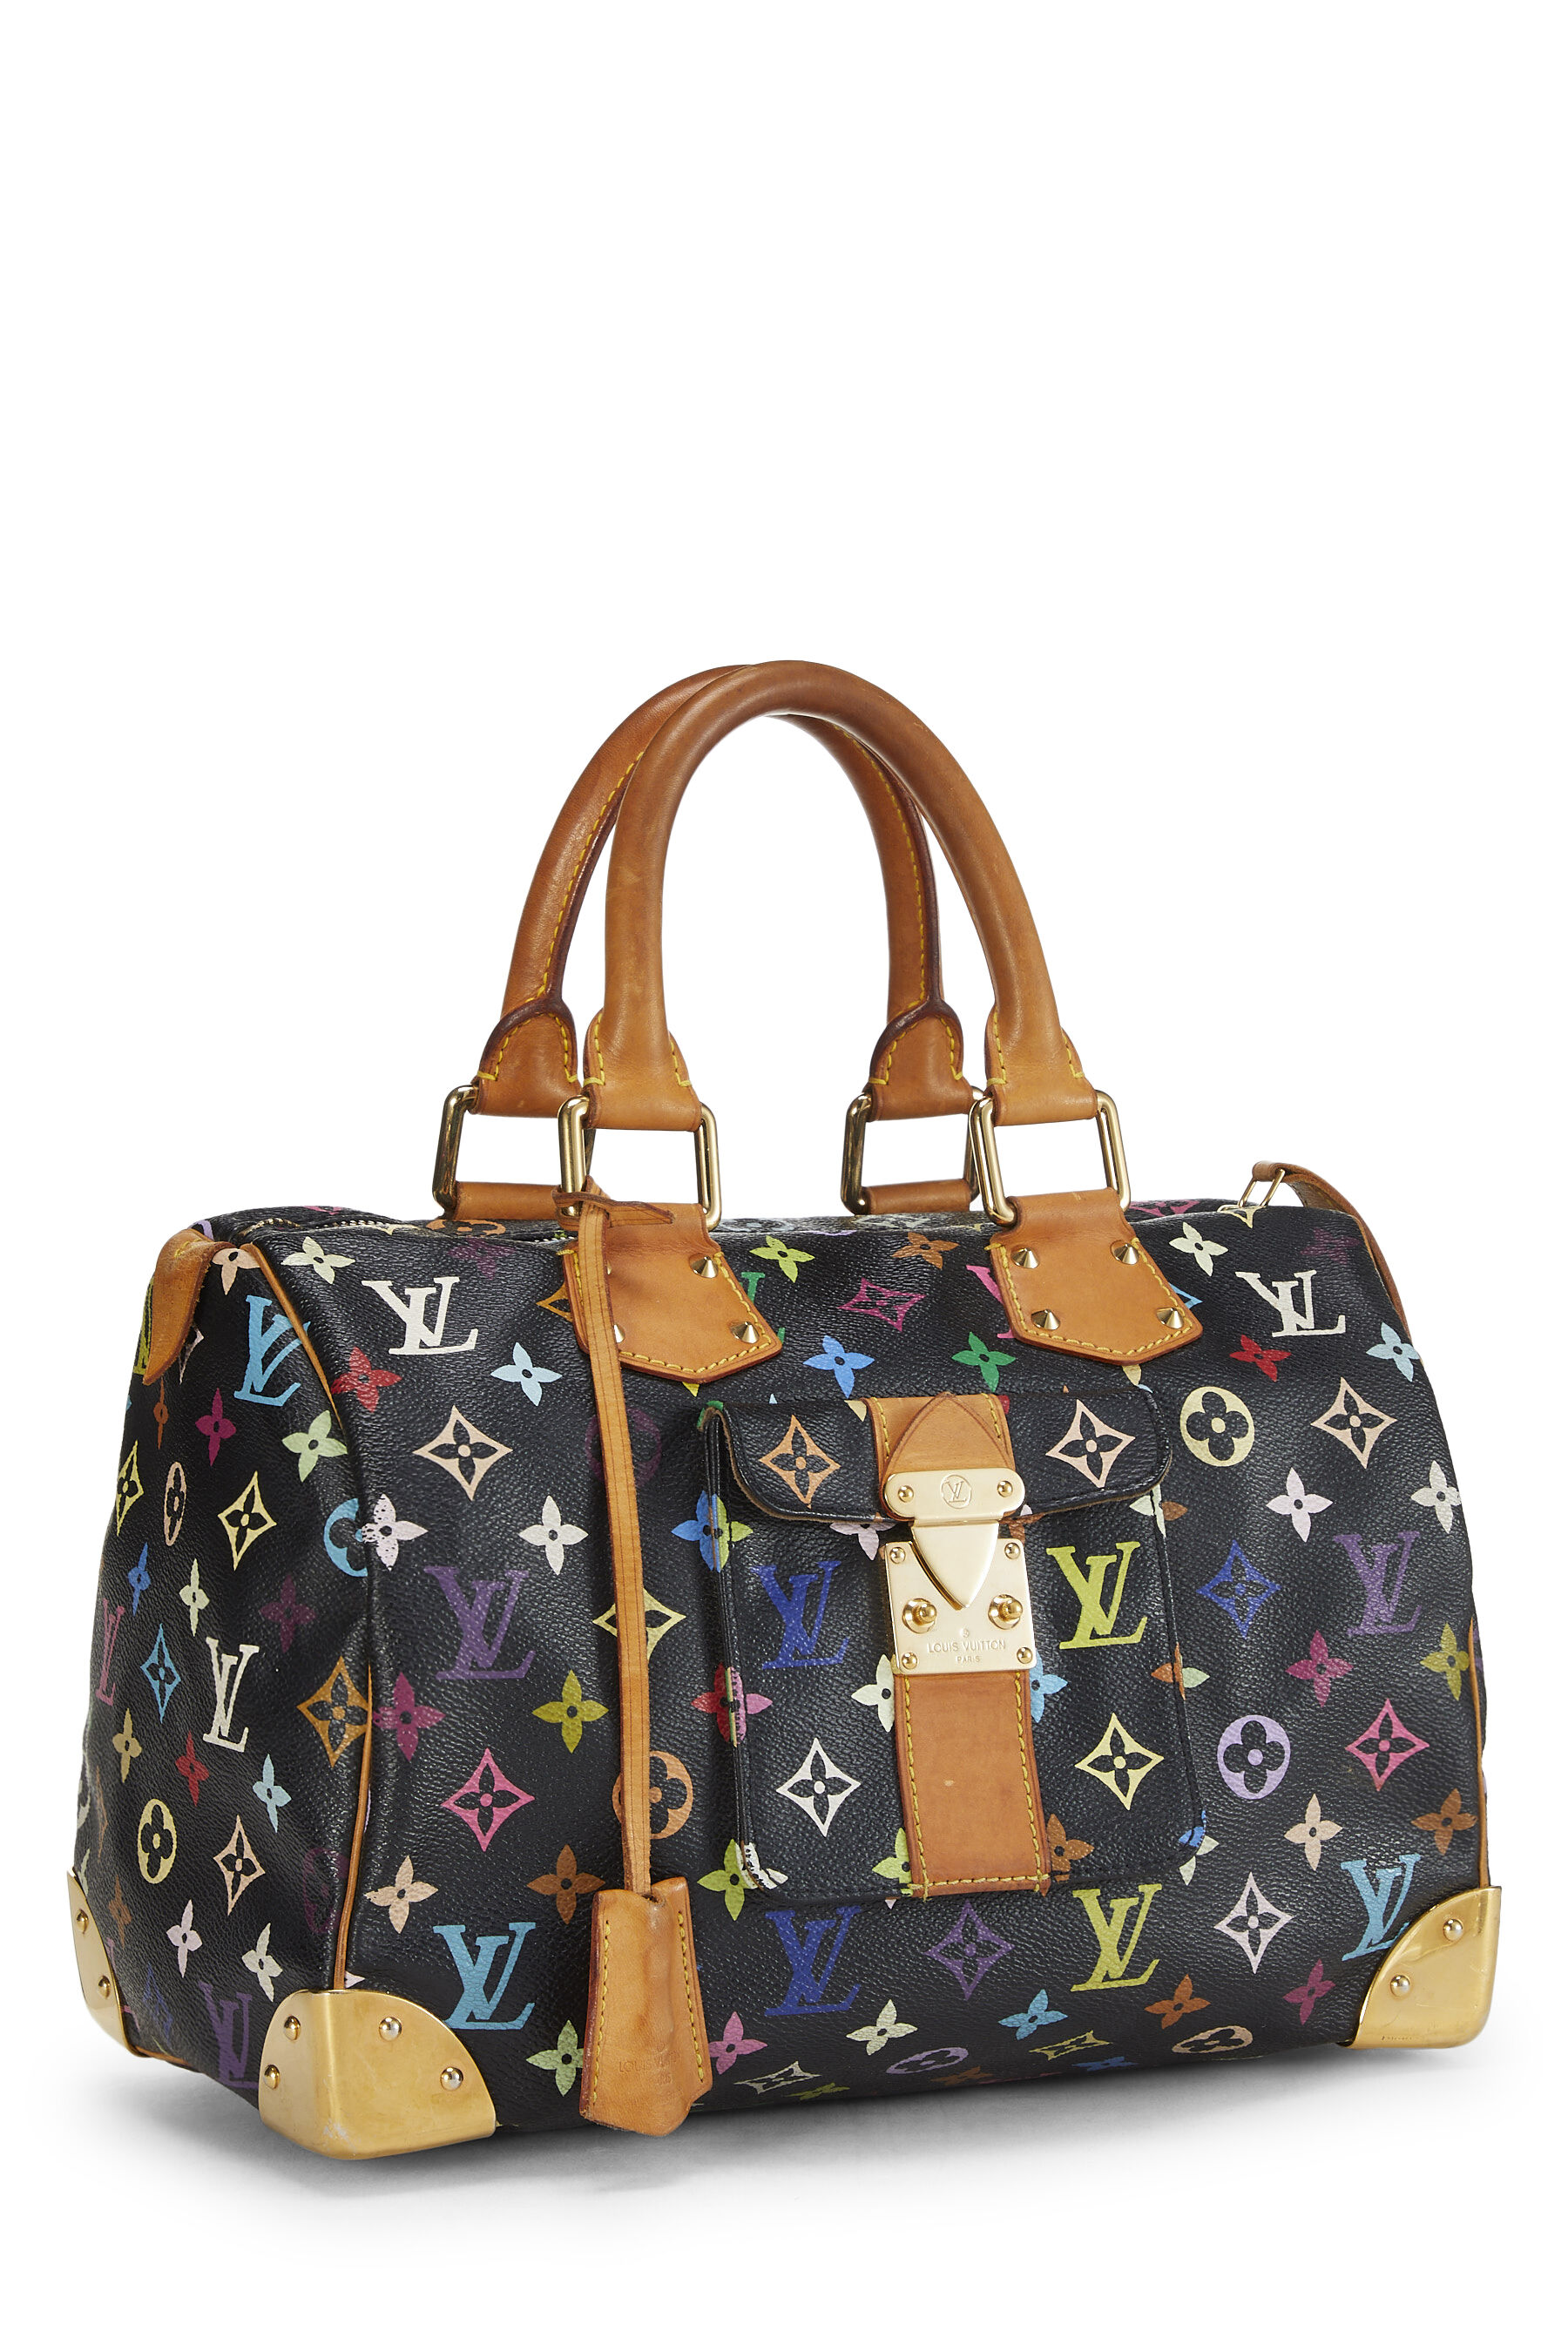 MISC][Fashion] What a Carry On! GD x Murakami for Louis Vuitton